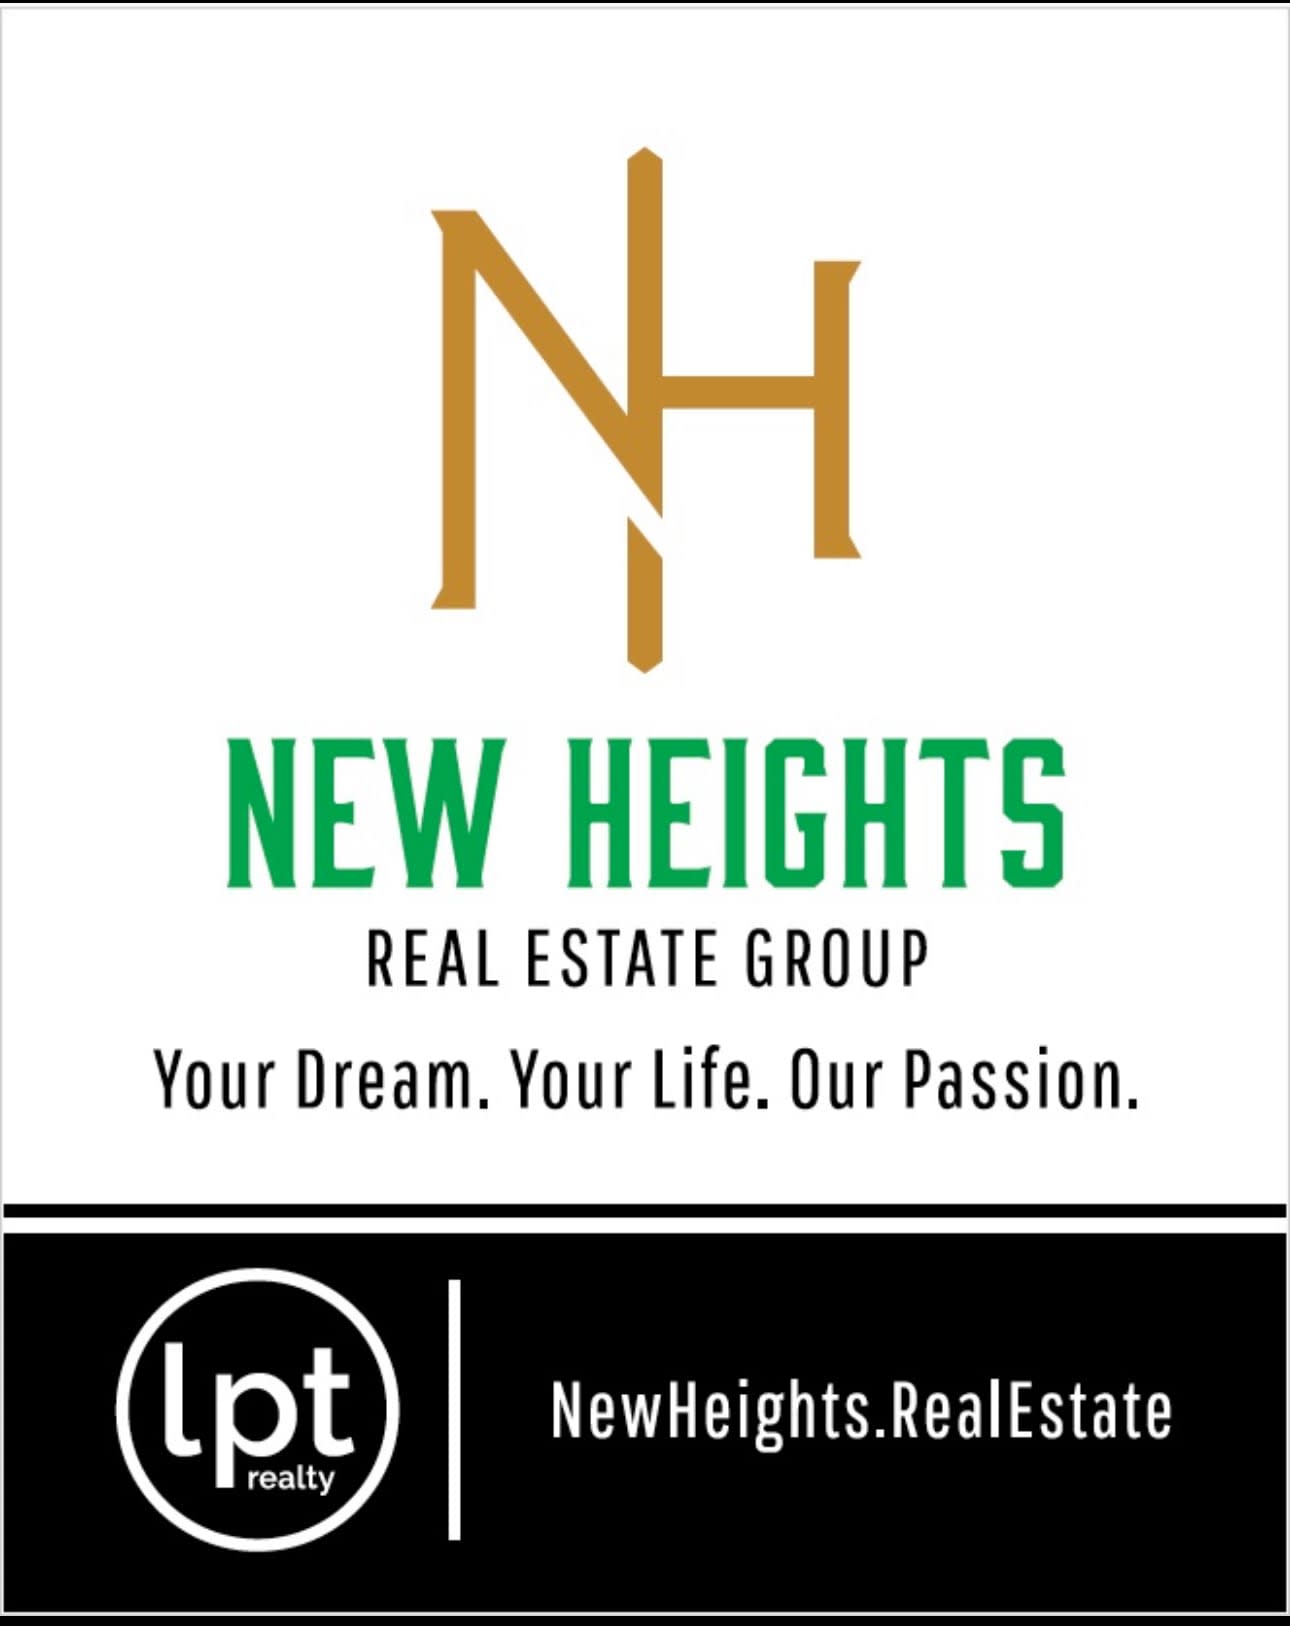 New Heights Real Estate Group       -        LPT Realty